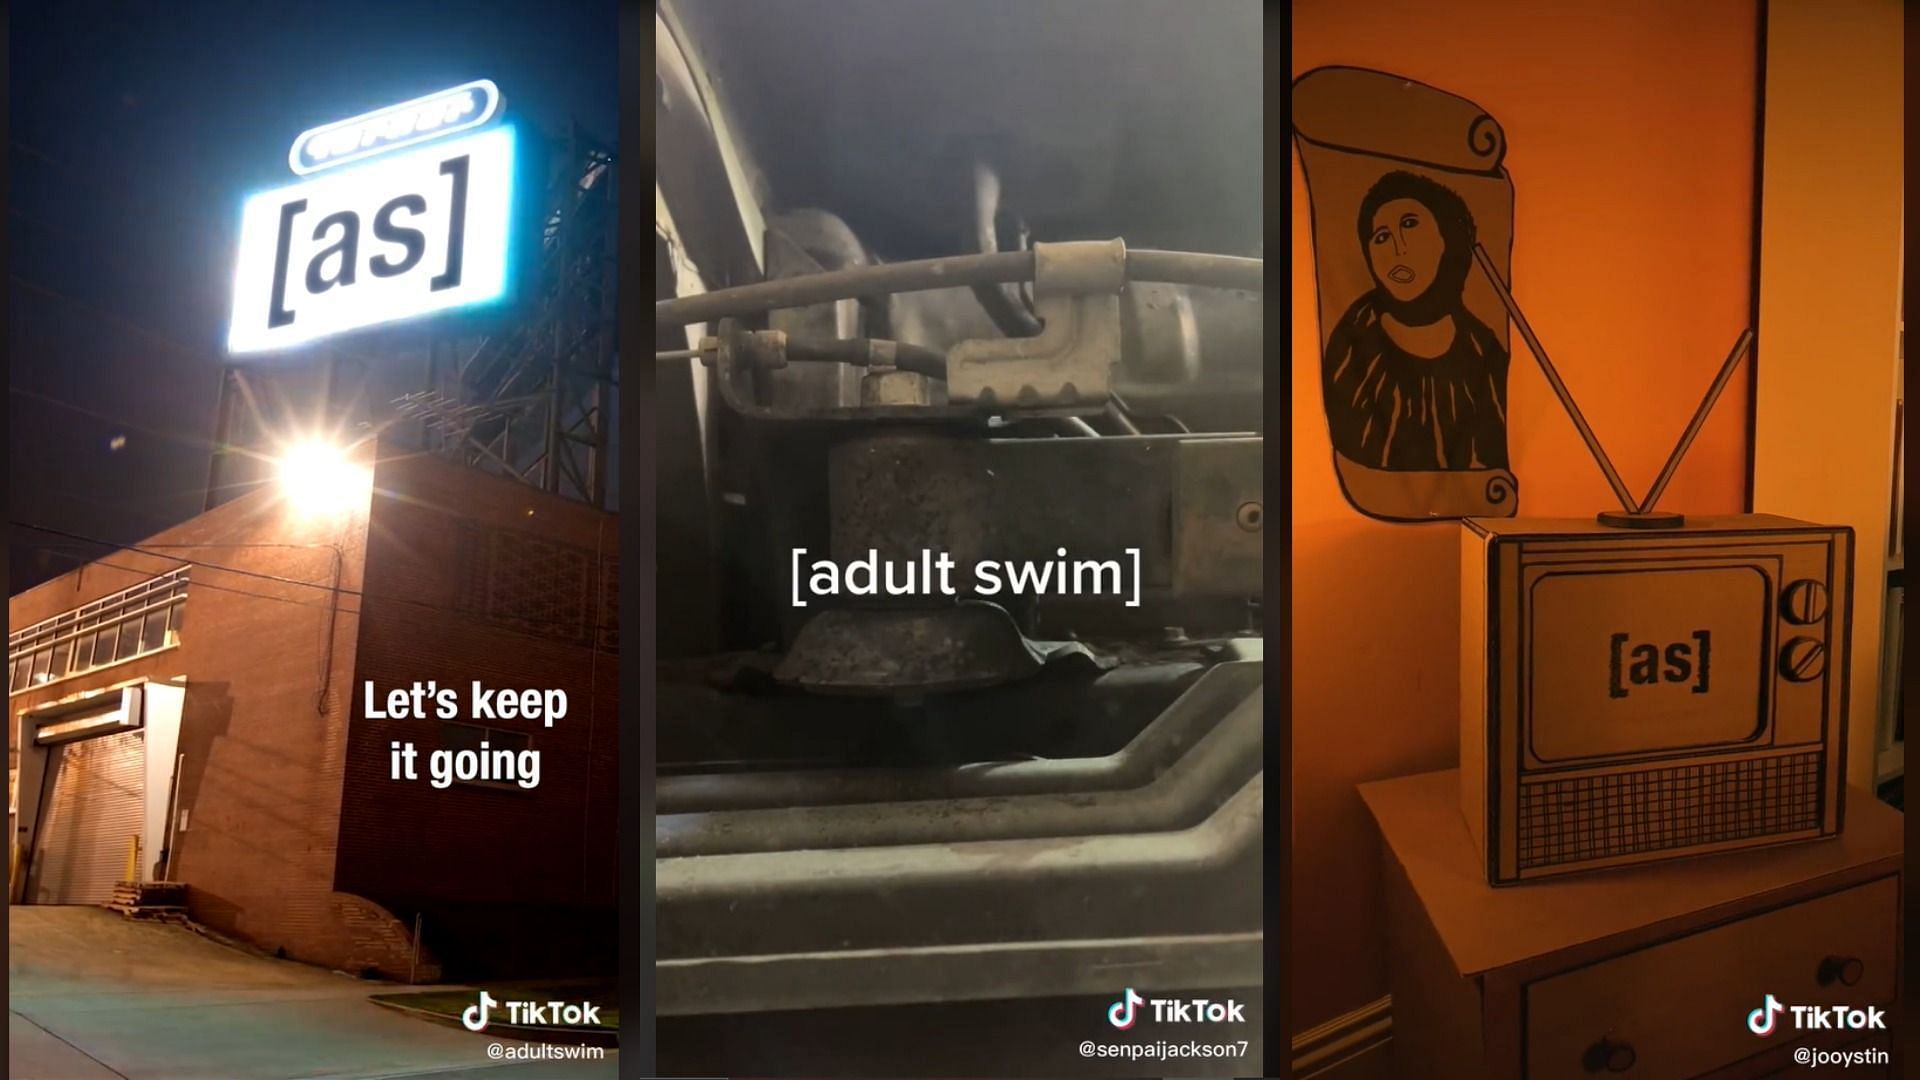 Adult Swim or [as] or AS was a trend that went viral in 2021 (Image via @adultswim, @senpaijackson7, and @jodystin/TikTok)